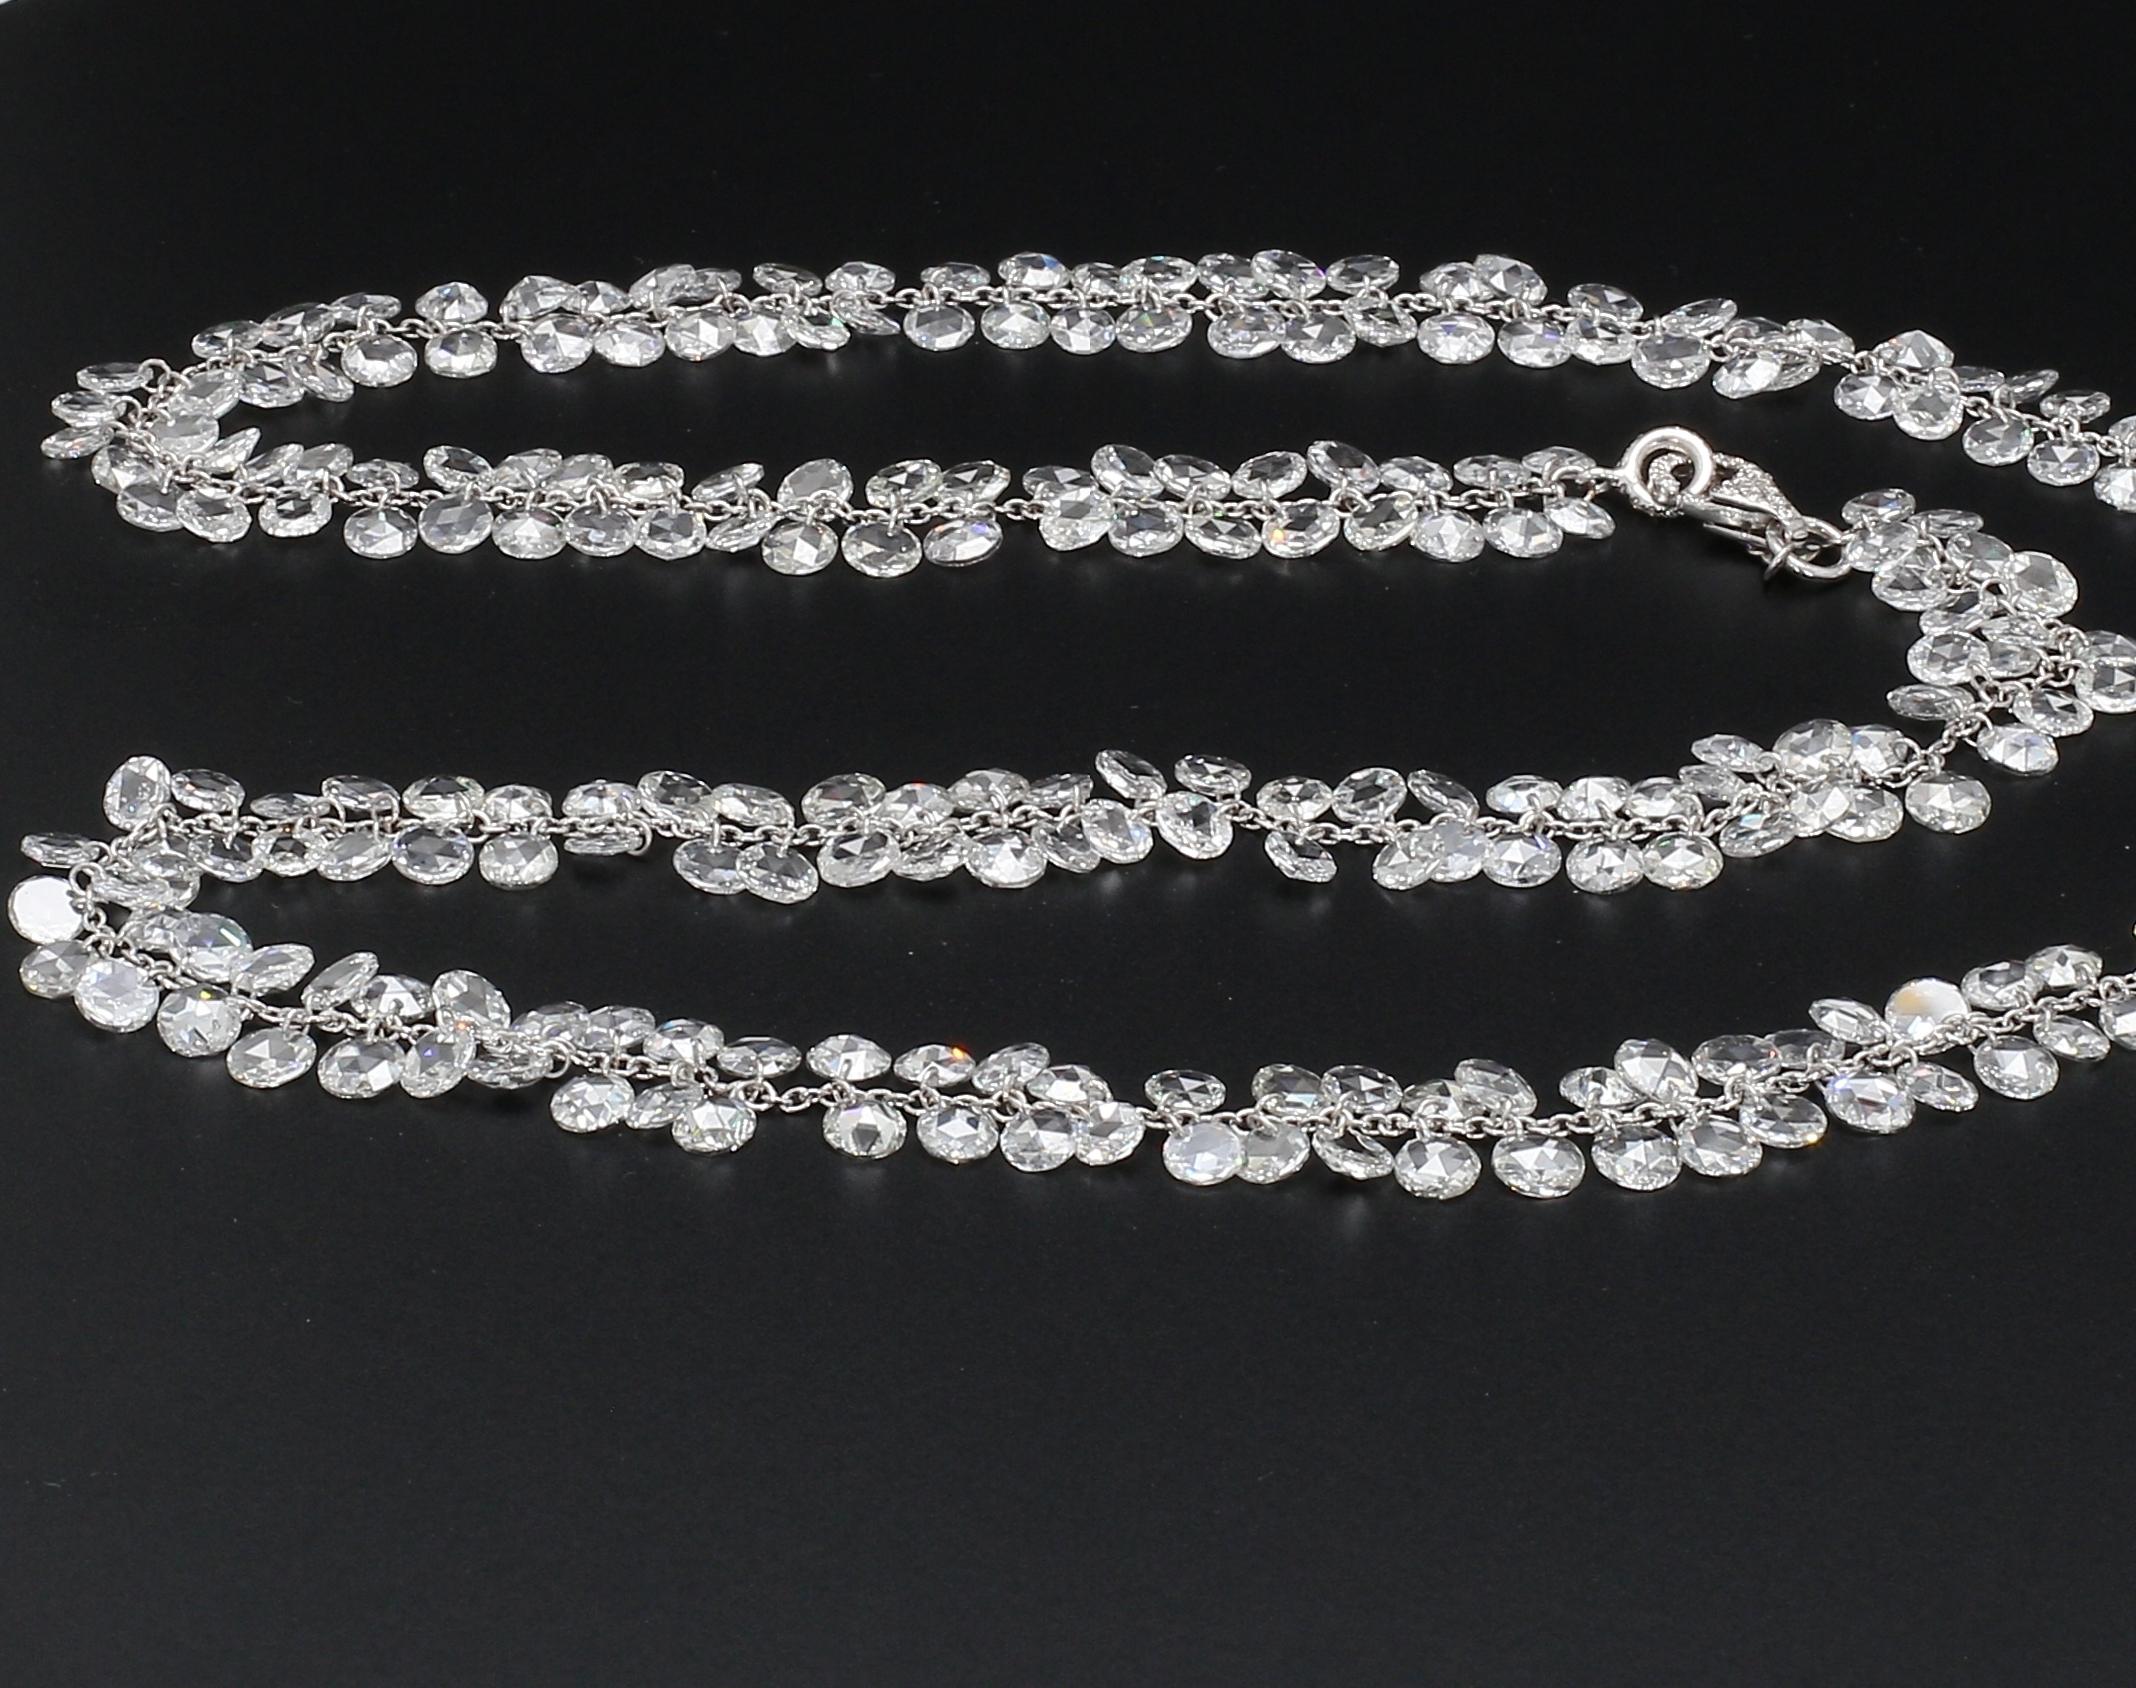 PANIM Rosecut Diamond Flower Chain Necklace in 18 Karat White Gold In New Condition For Sale In Tsim Sha Tsui, Hong Kong